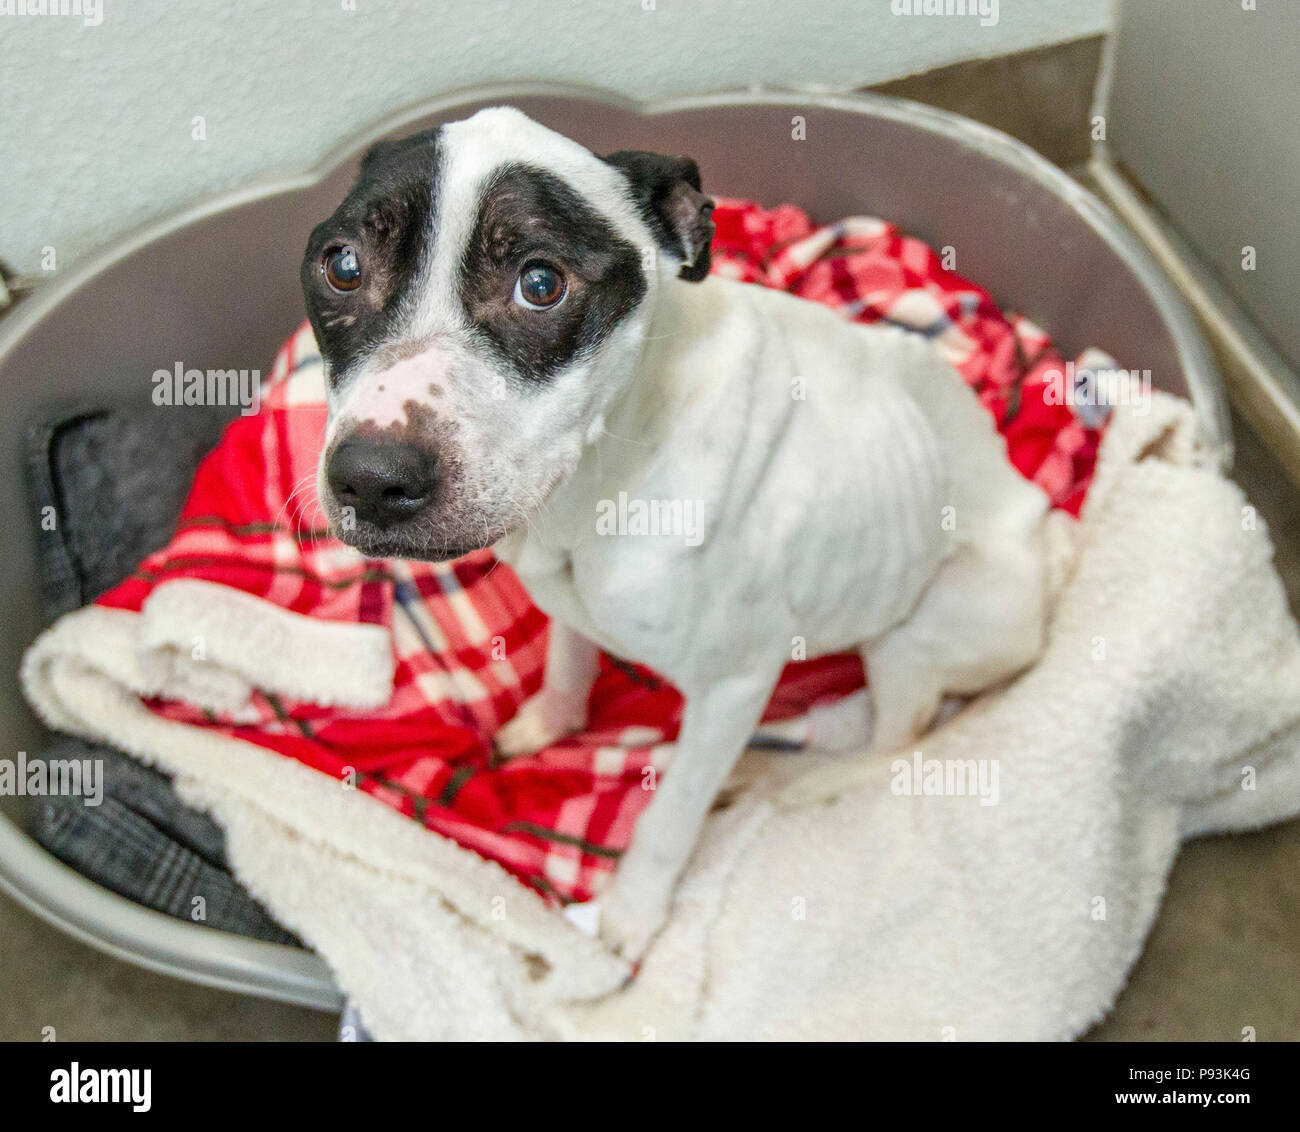 Abused dog getting cared for after rescue Stock Photo